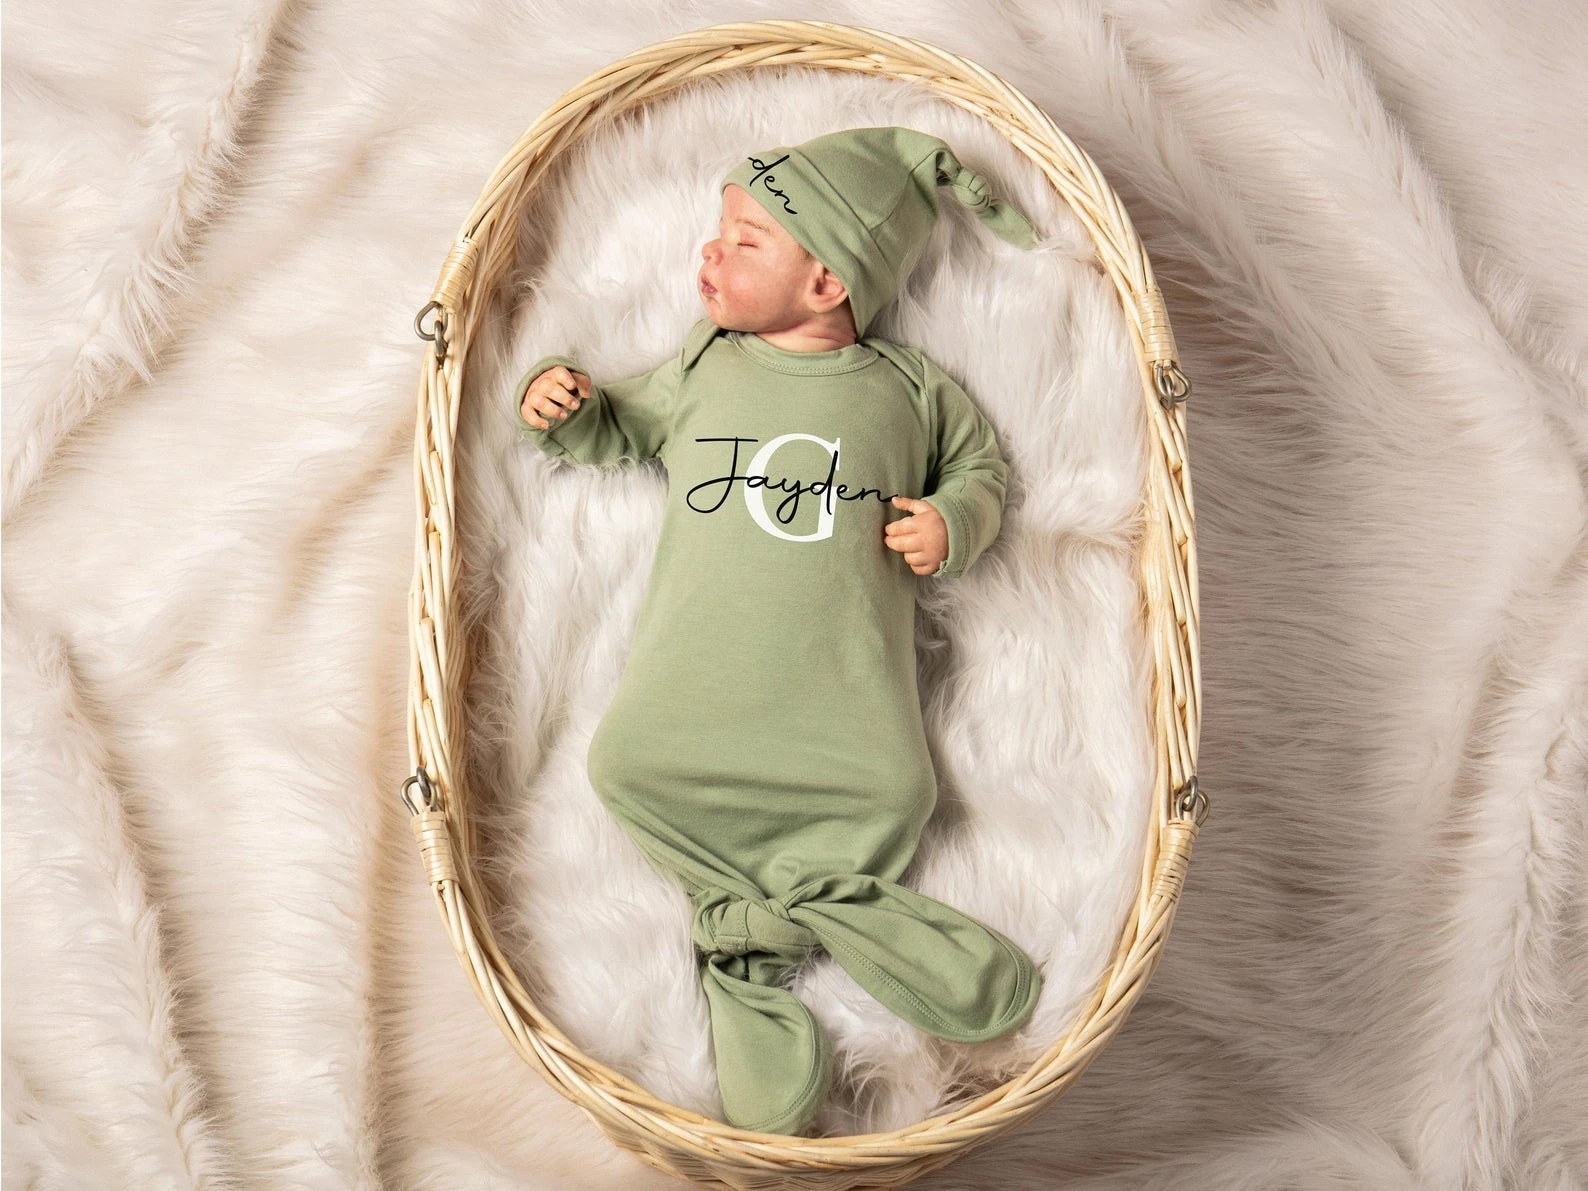 Monogrammed Baby Boy Coming Home Outfit Personalized Newborn Knotted Sleeper Baby Shower Gift Take Home Outfit Baby Boy Hat Set matching family pj pants